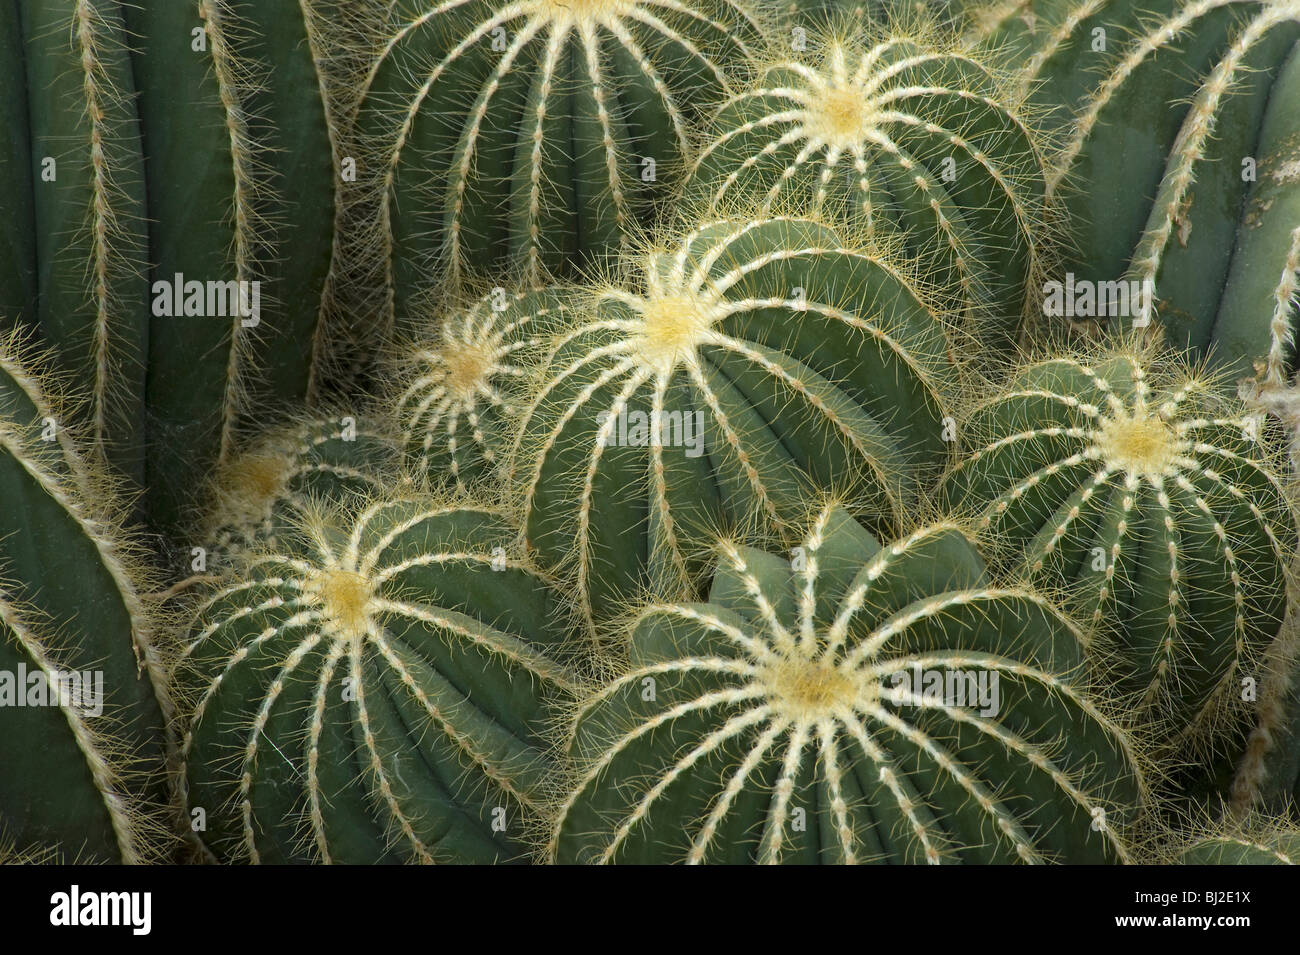 Parodia magnifica with spines on ridges, S Brazil and Uruguay Stock Photo